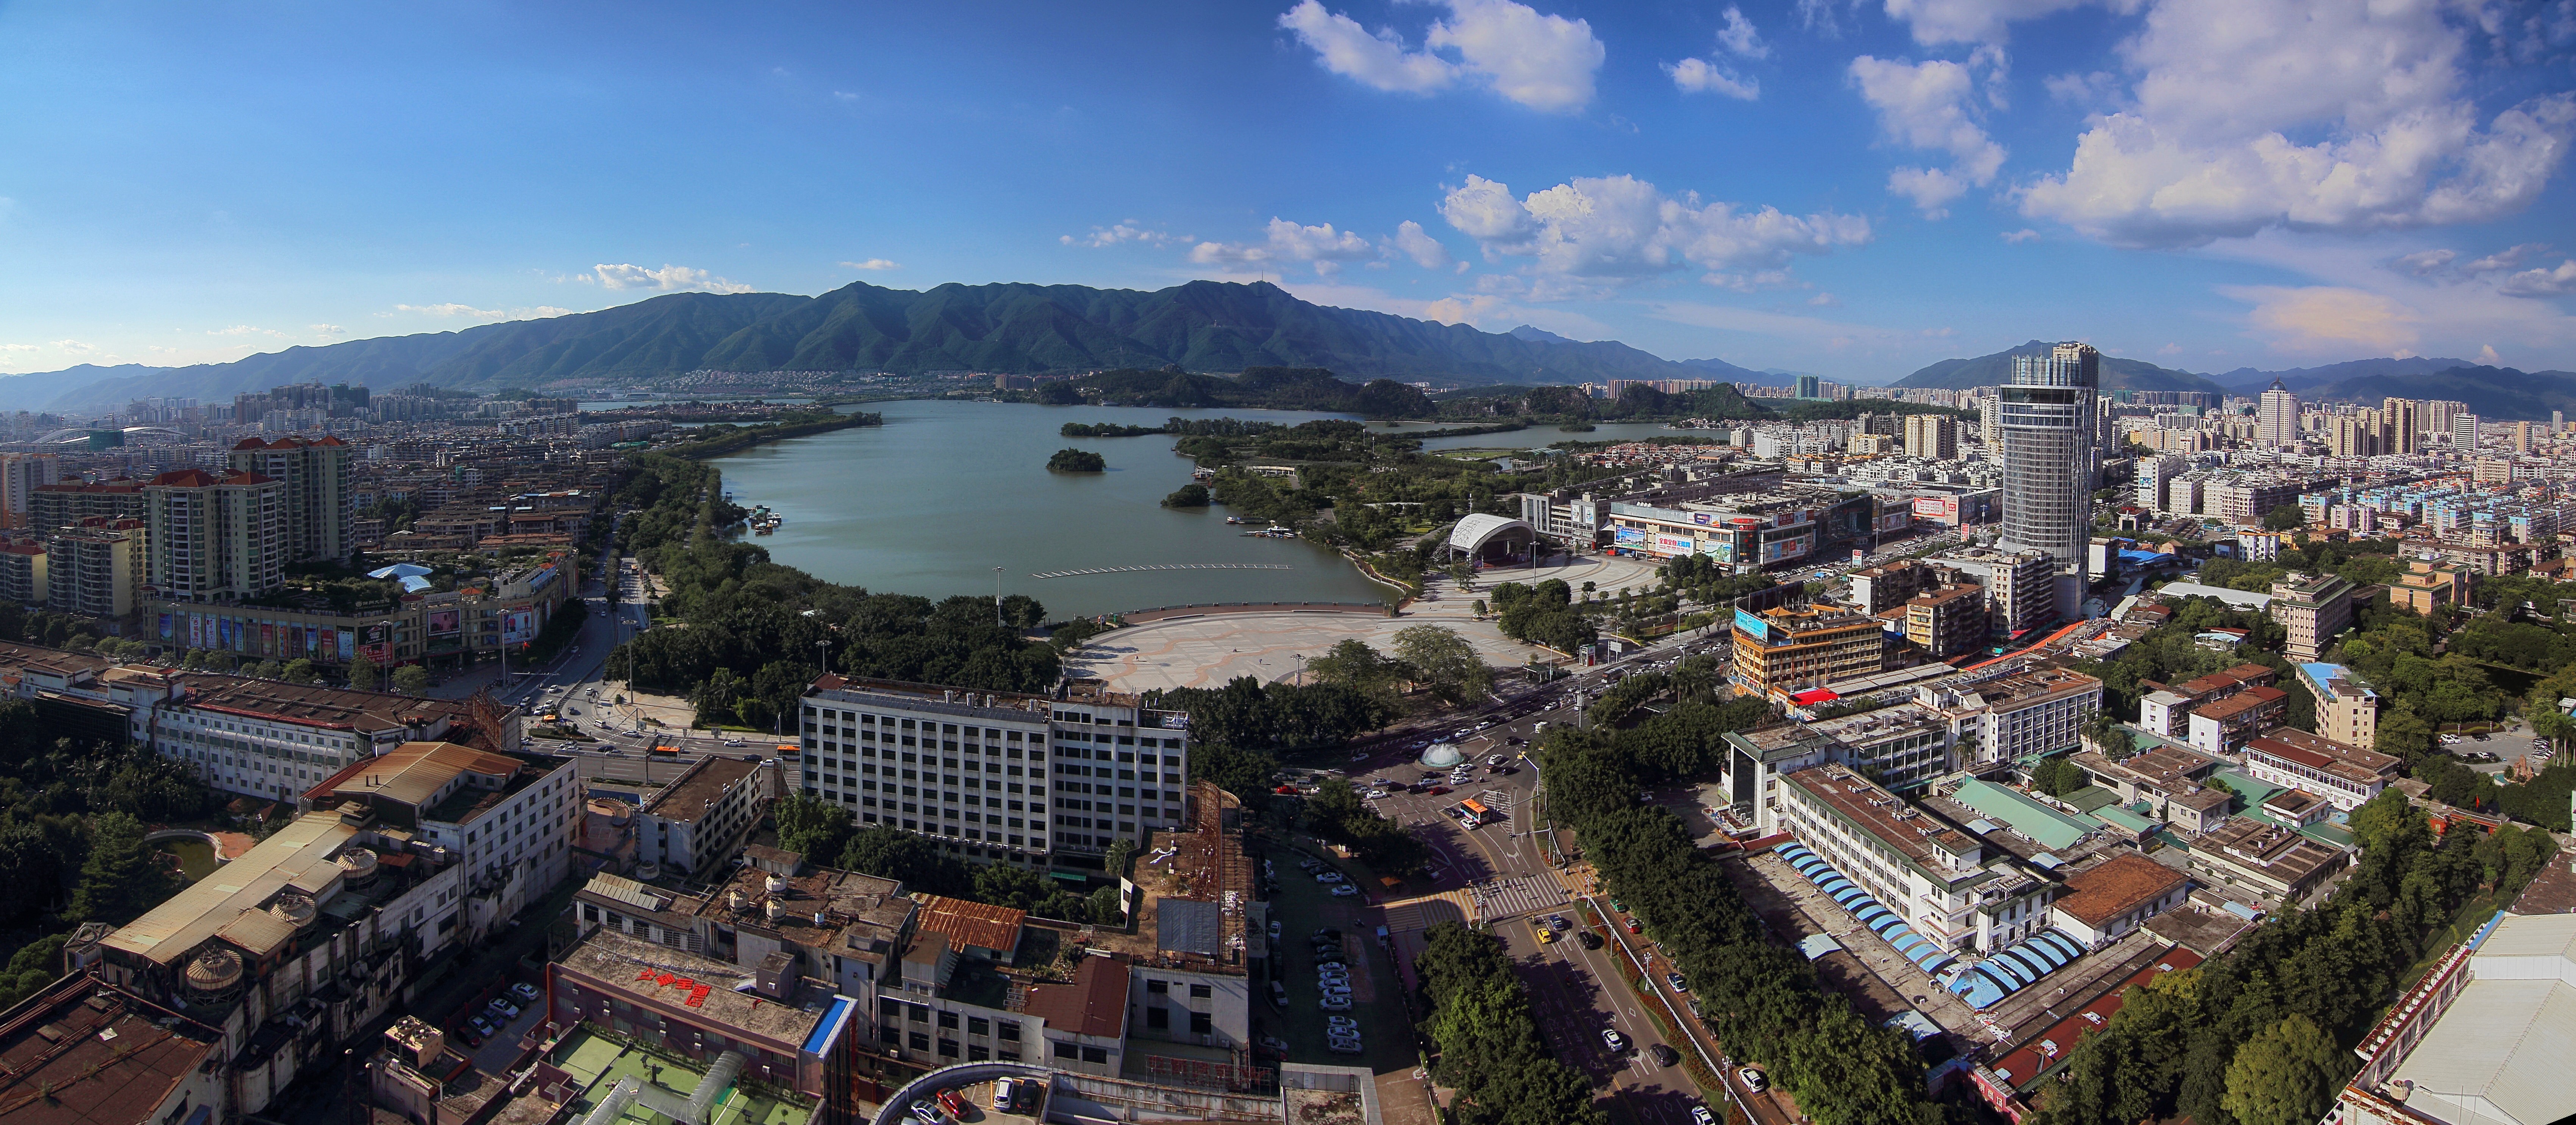 An aerial view of Zhaoqing city in Guangdong province. Photo: Shutterstock Images